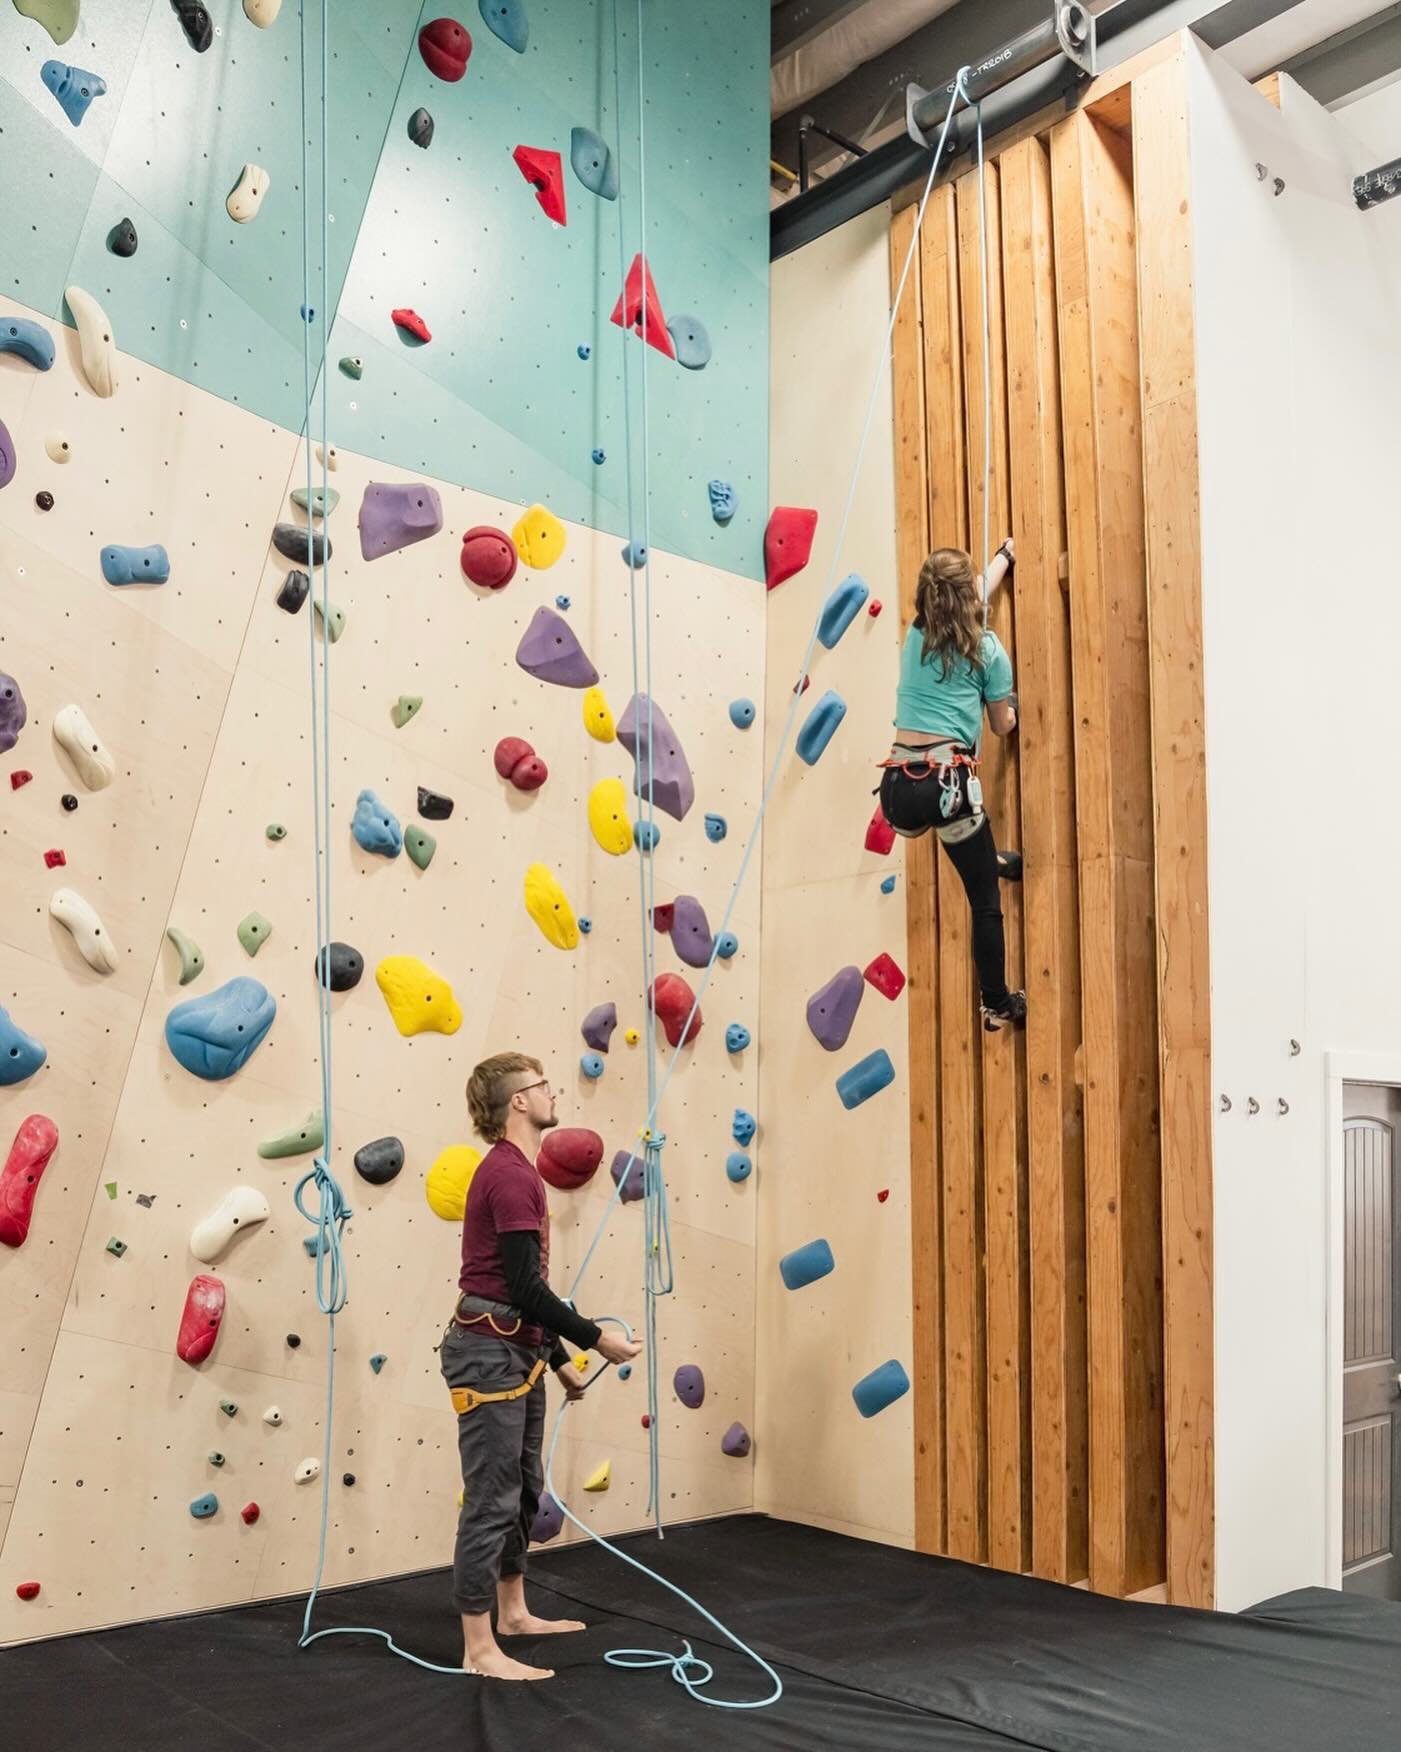 LEARN TO CLIMB 🧗 
 
5:30-6:30pm Intro to climbing technique
6:45-7:45pm Learn to Belay Class

On Thursdays we have an intro to climbing technique and a learn to belay course!
 
Our qualified instructors give expert guidance to help you feel more com